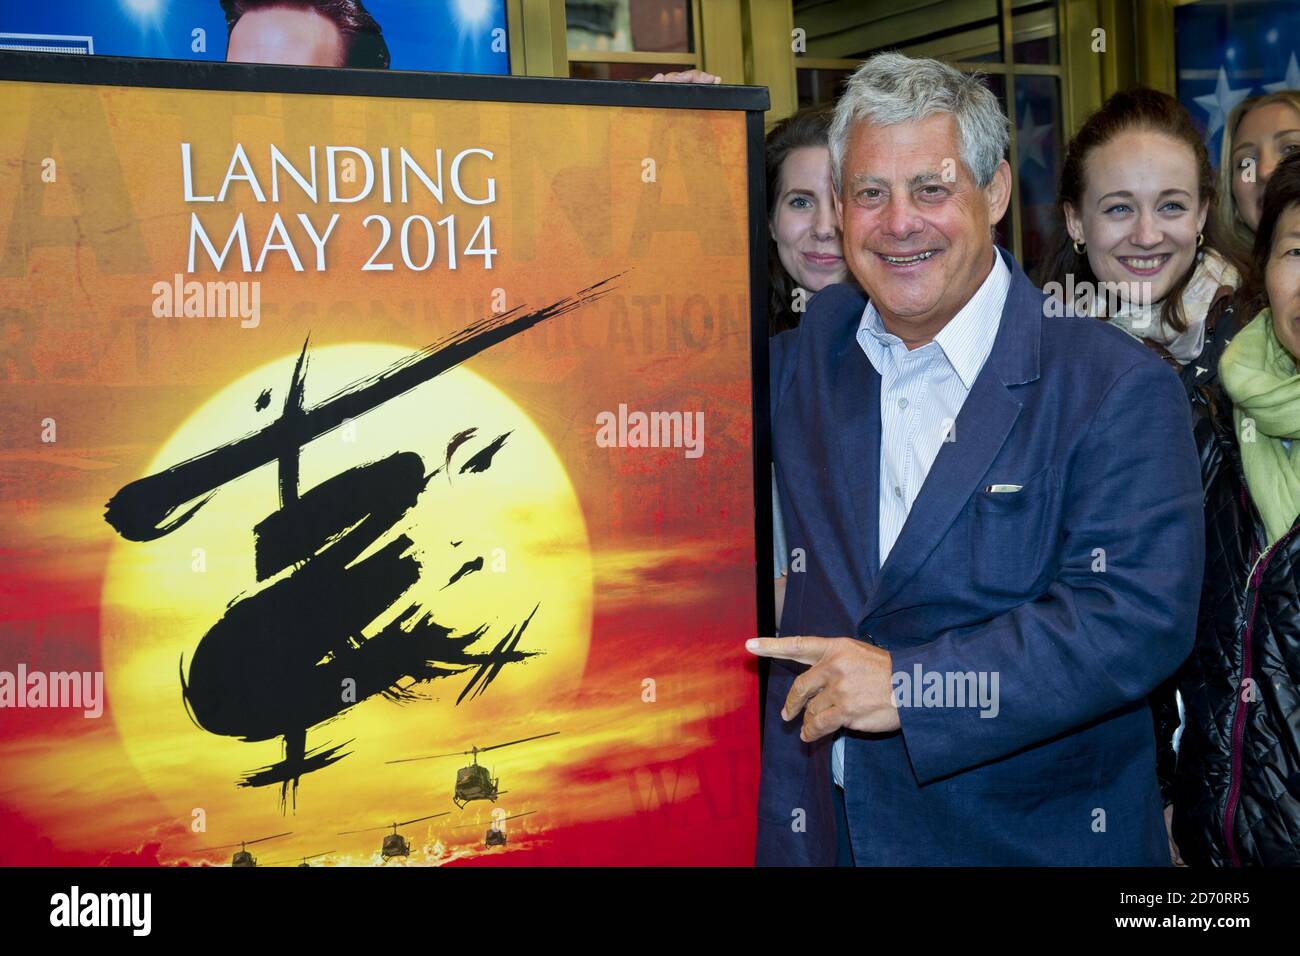 Producer Cameron Mackintosh welcomes theatre-goers queuing for Miss Saigon tickets, at the Prince Edward theatre in central London. Tickets for the show (opening May 2014) went on sale at 10am today, and sales set a new record for the largest single day of sales in West End and Broadway history. Stock Photo